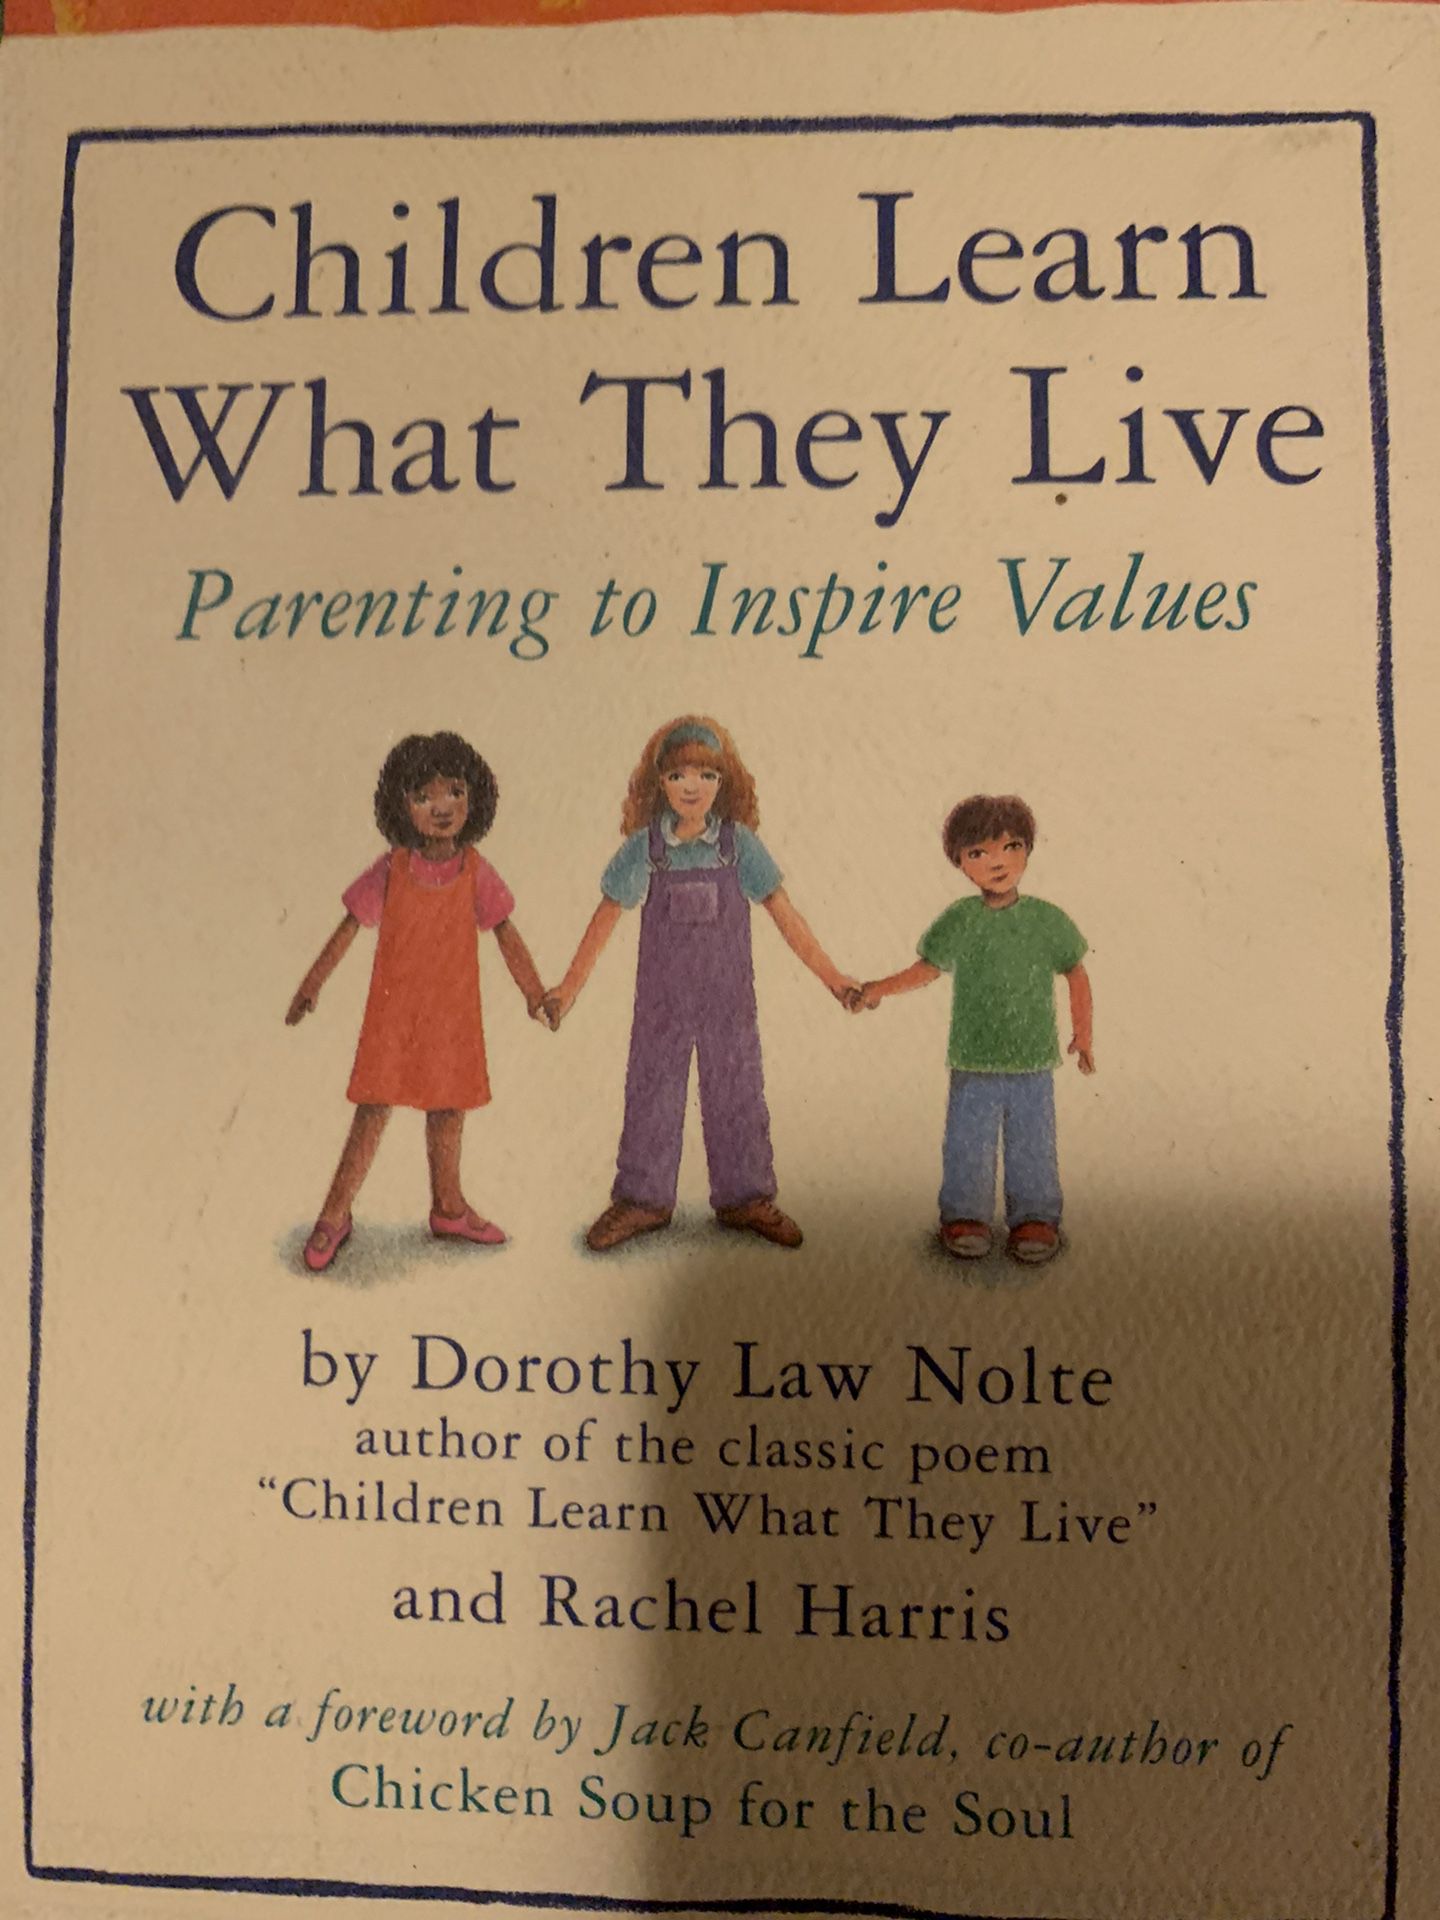 Book: Children learn what they live (Parenting to inspire values)